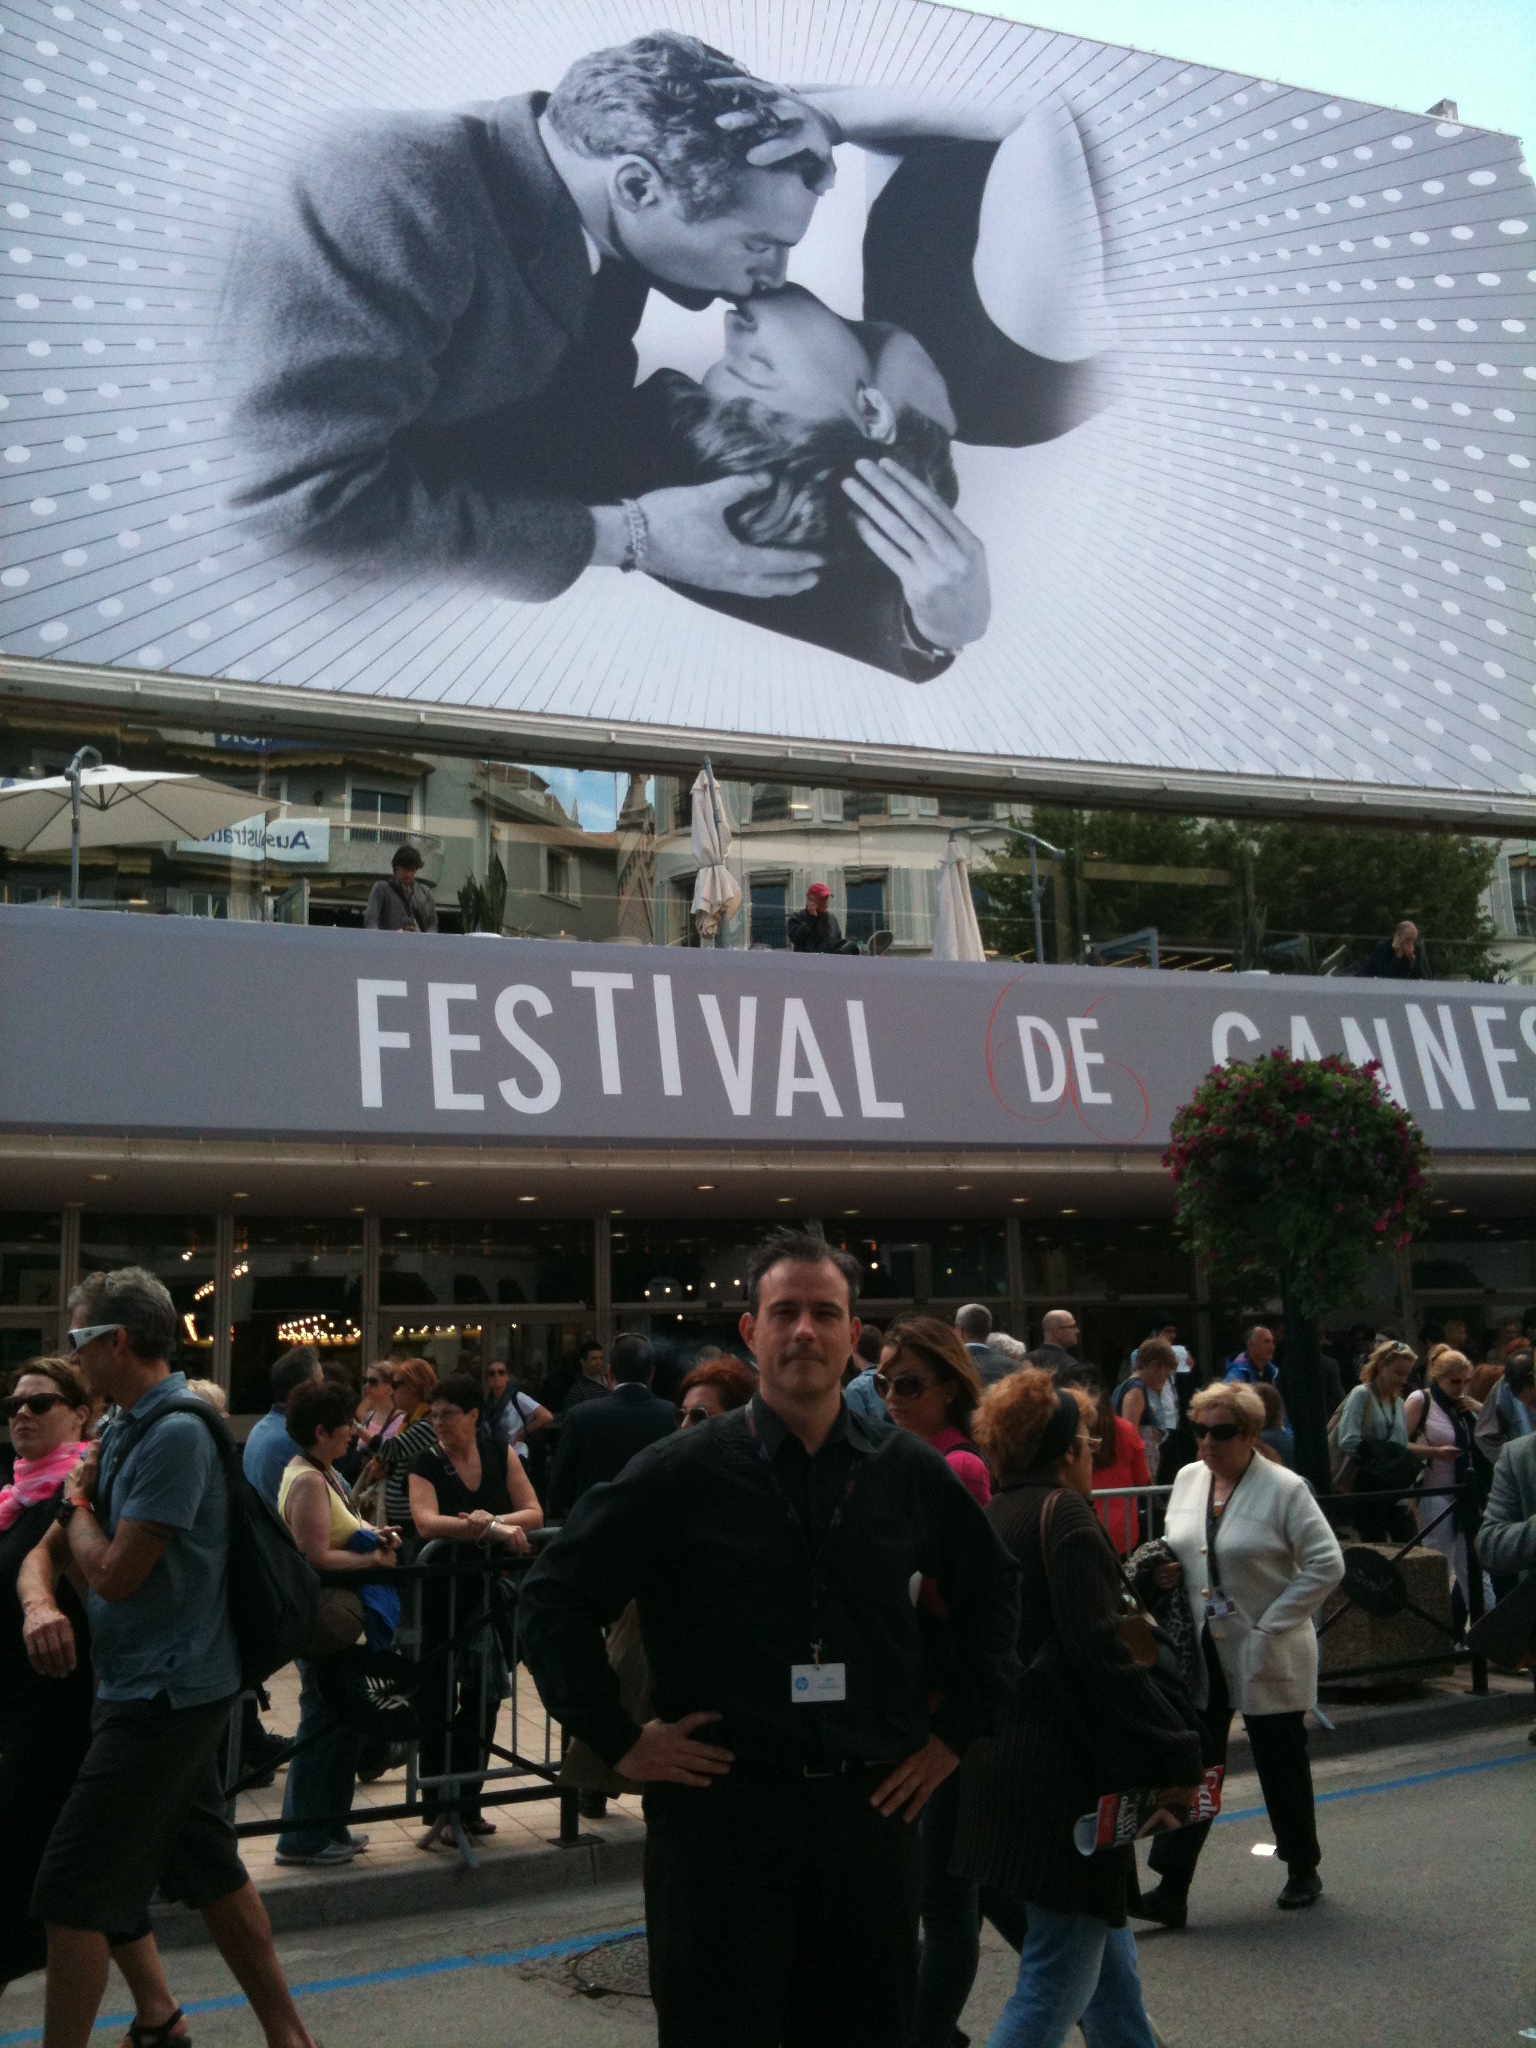 DW Gordon at the Cannes Film Festival 2013 where he announced the commencement of a new movie project: Two Captains.